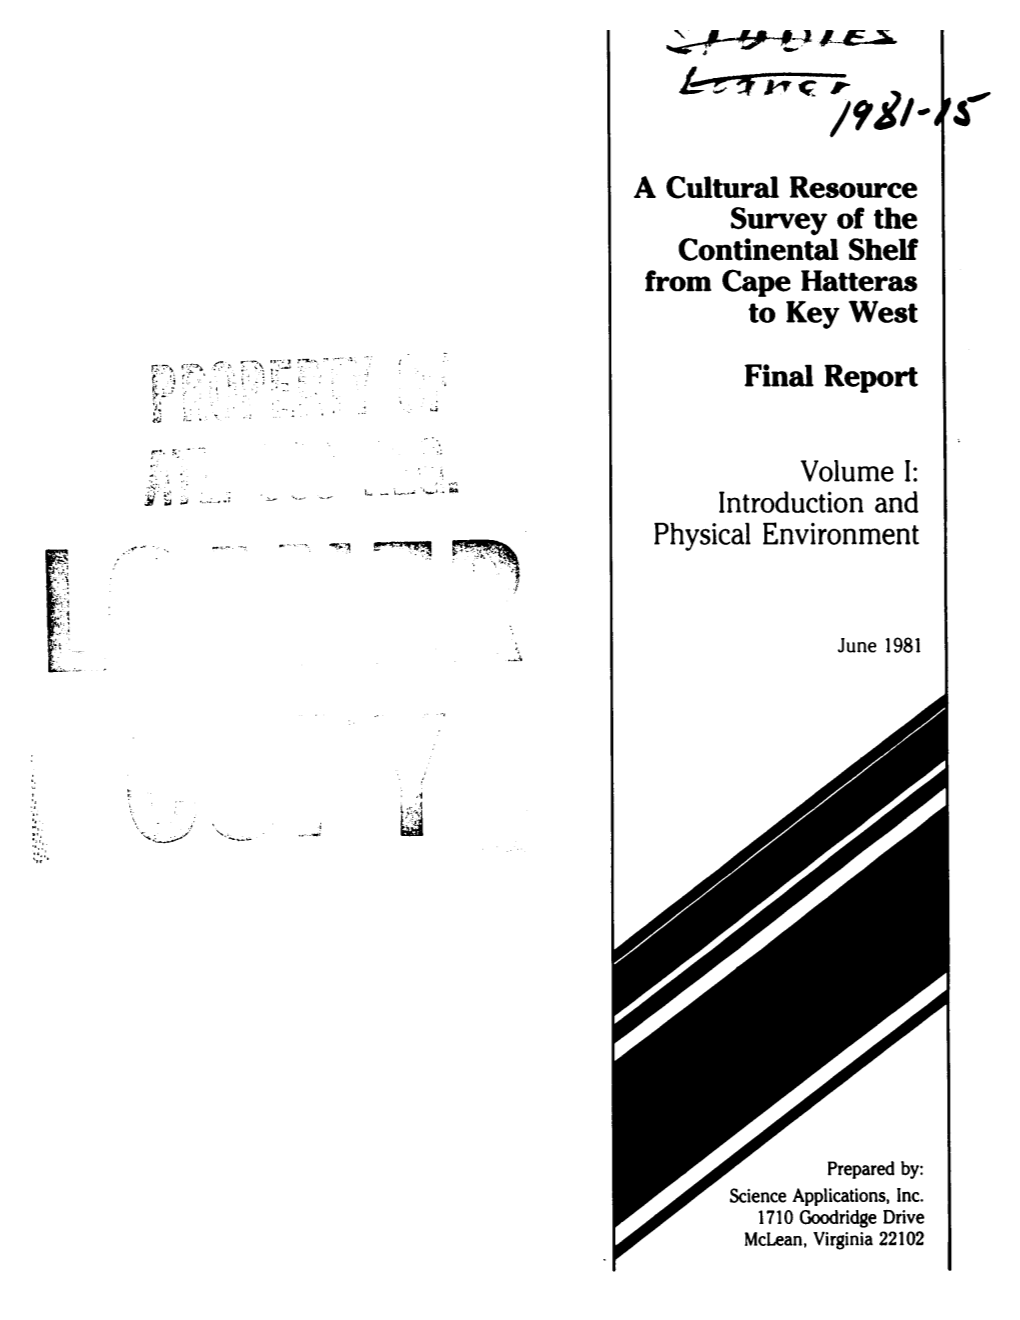 A Cultural Resource Survey of the Continental Shelf from Cape Hatteras to Key West FINAL REPORT: June 30, 1981, Volume 1